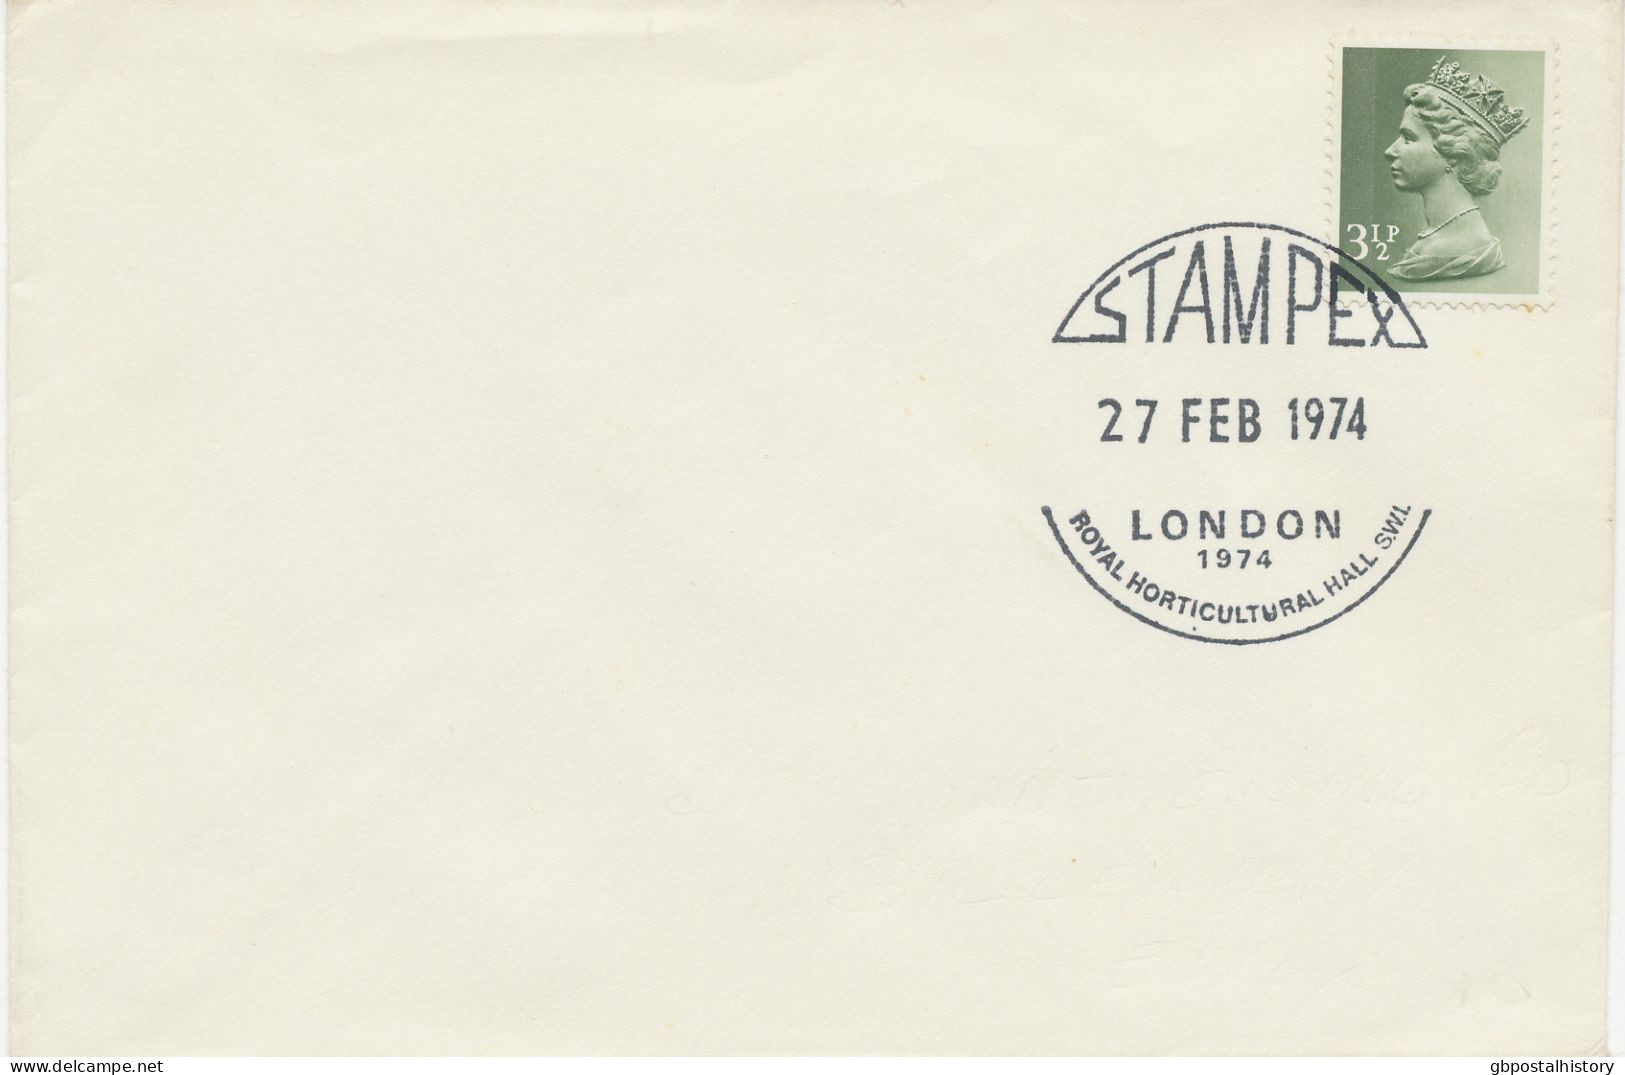 GB SPECIAL EVENT POSTMARKS 1974 STAMPEX LONDON ROYAL HORTICULTURAL HALL S.W.I. - Briefe U. Dokumente